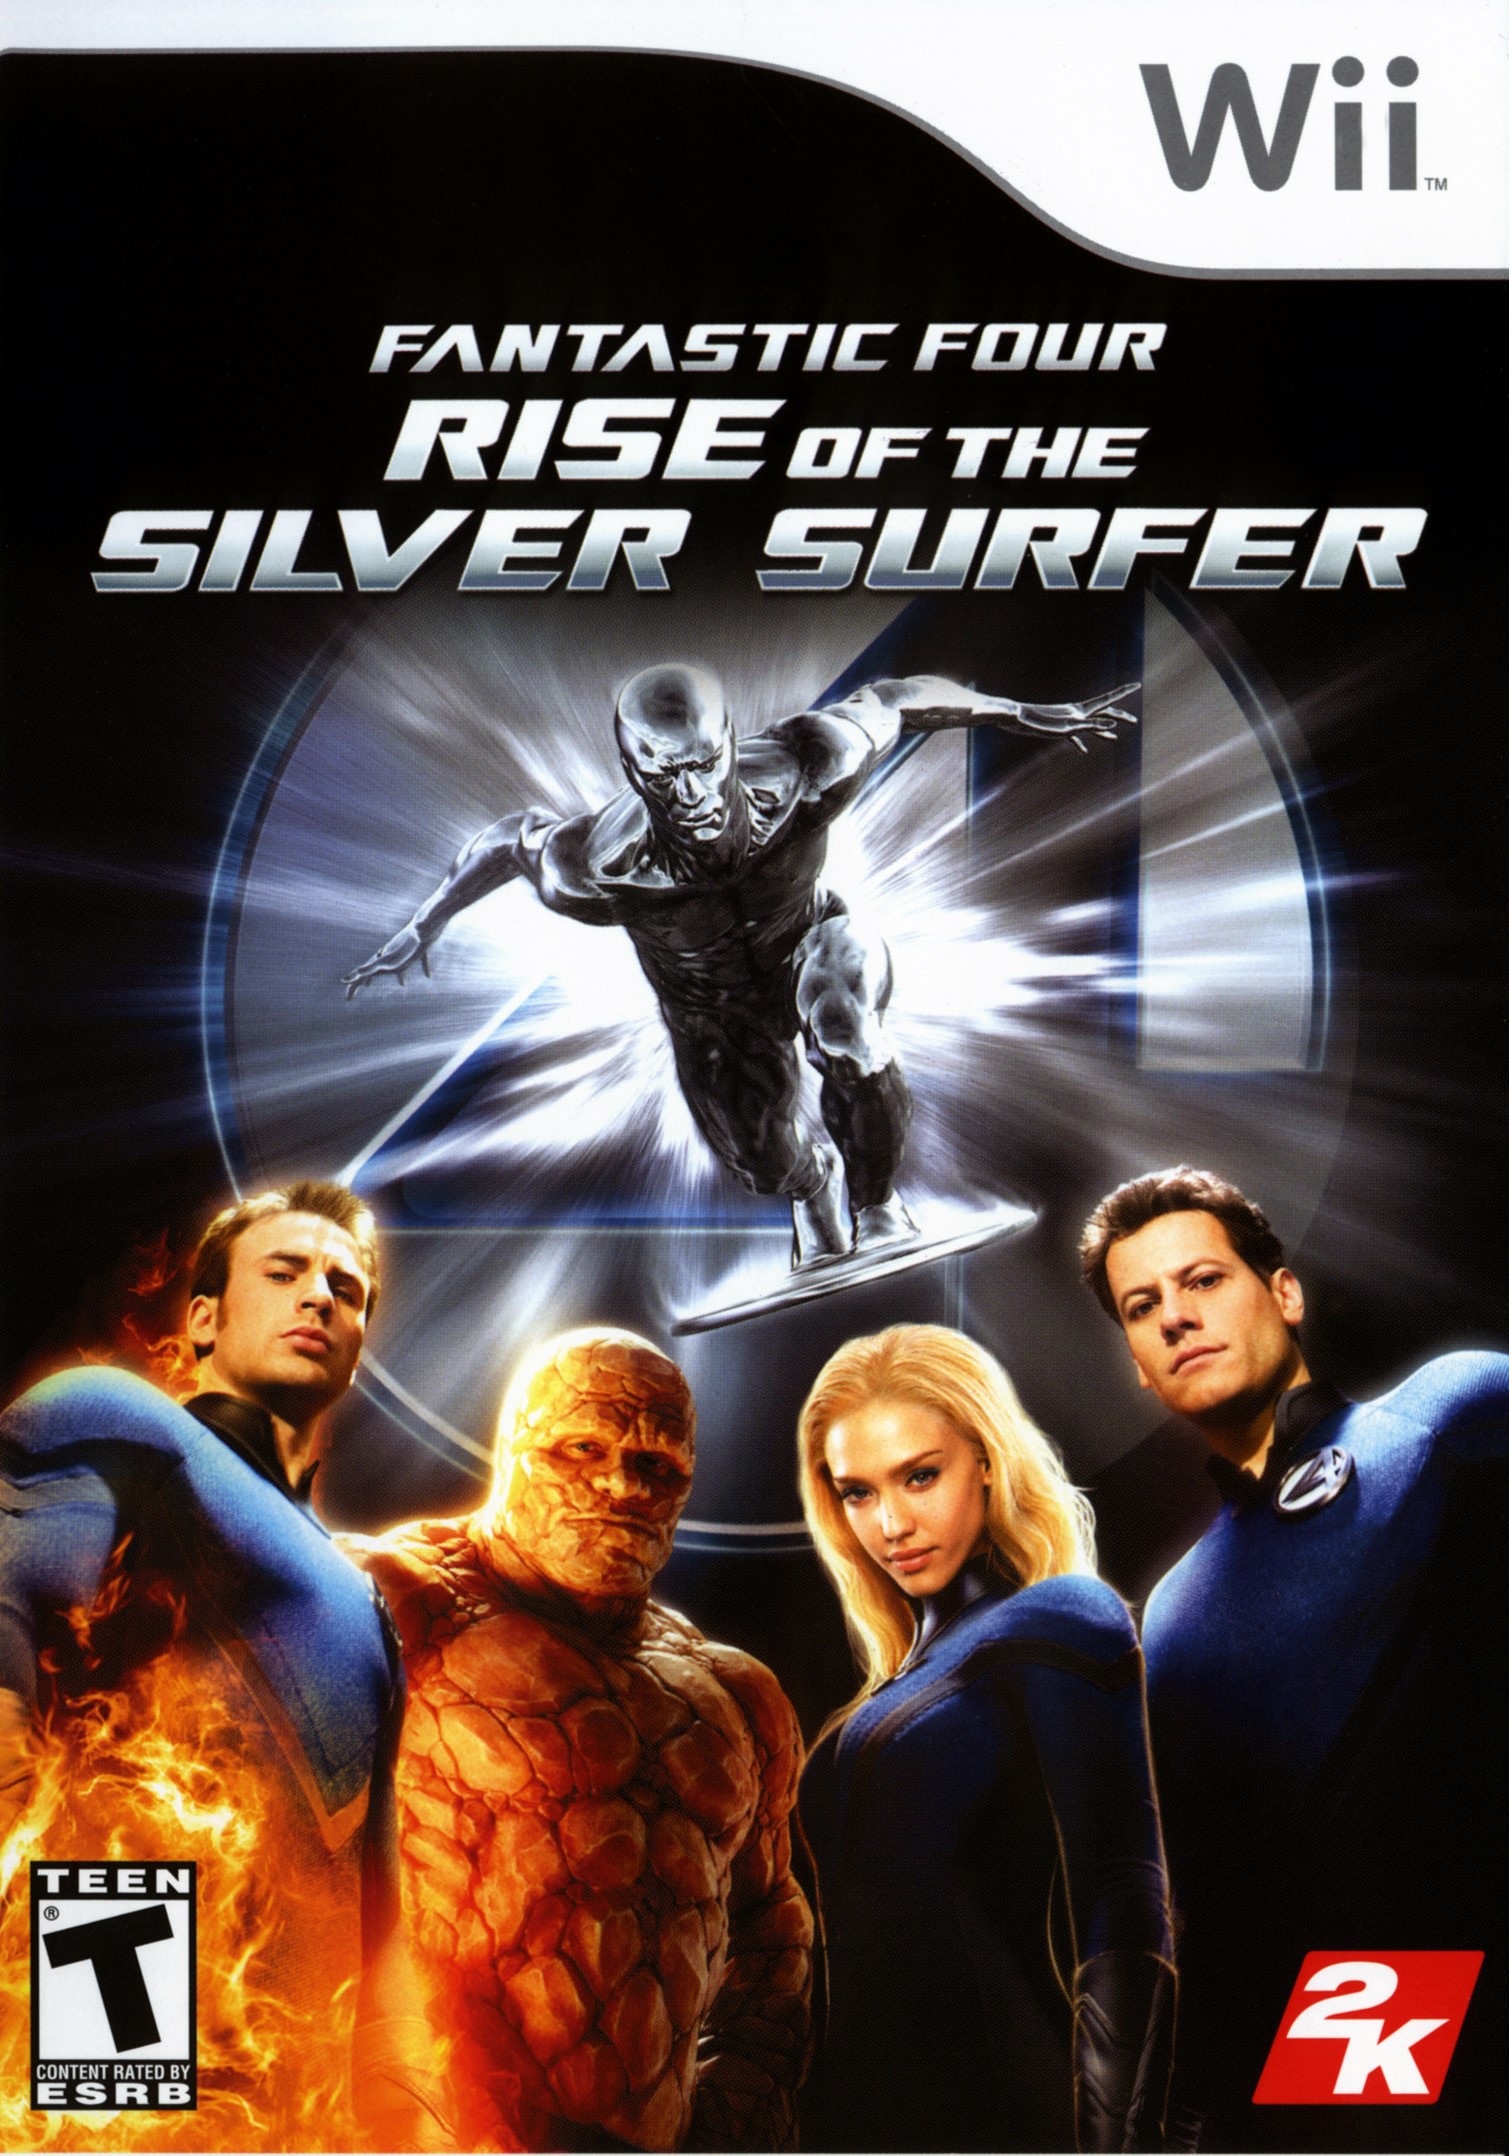 'Fantastic Four: Rise of the Silver Surfer'